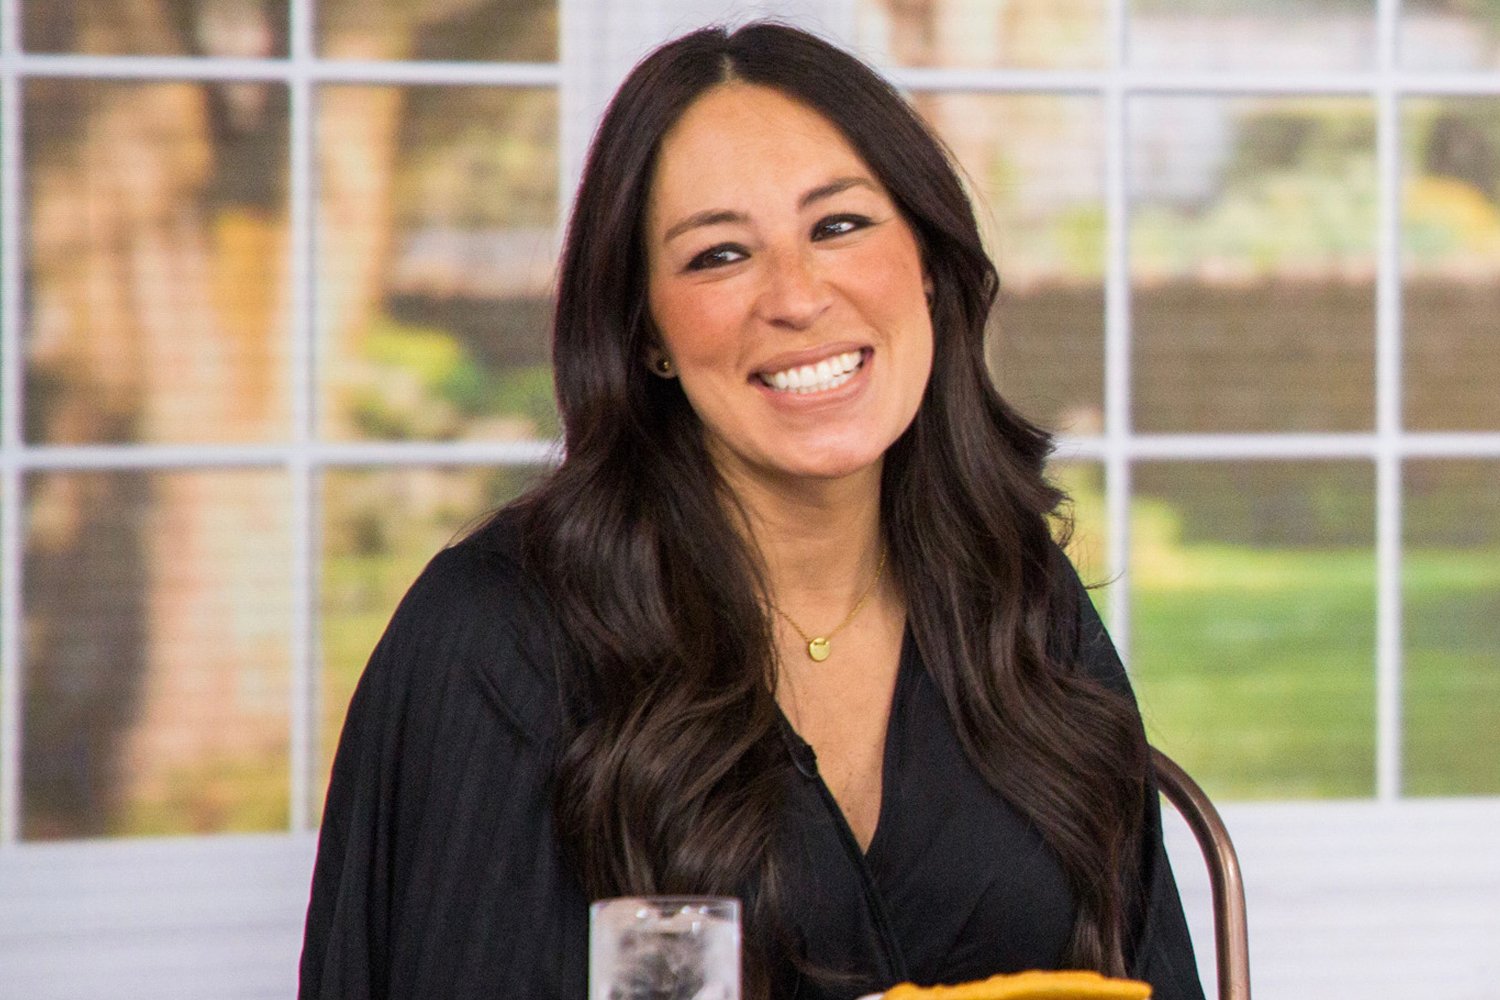 Joanna Gaines during an appearance on the 'Today' show in 2018